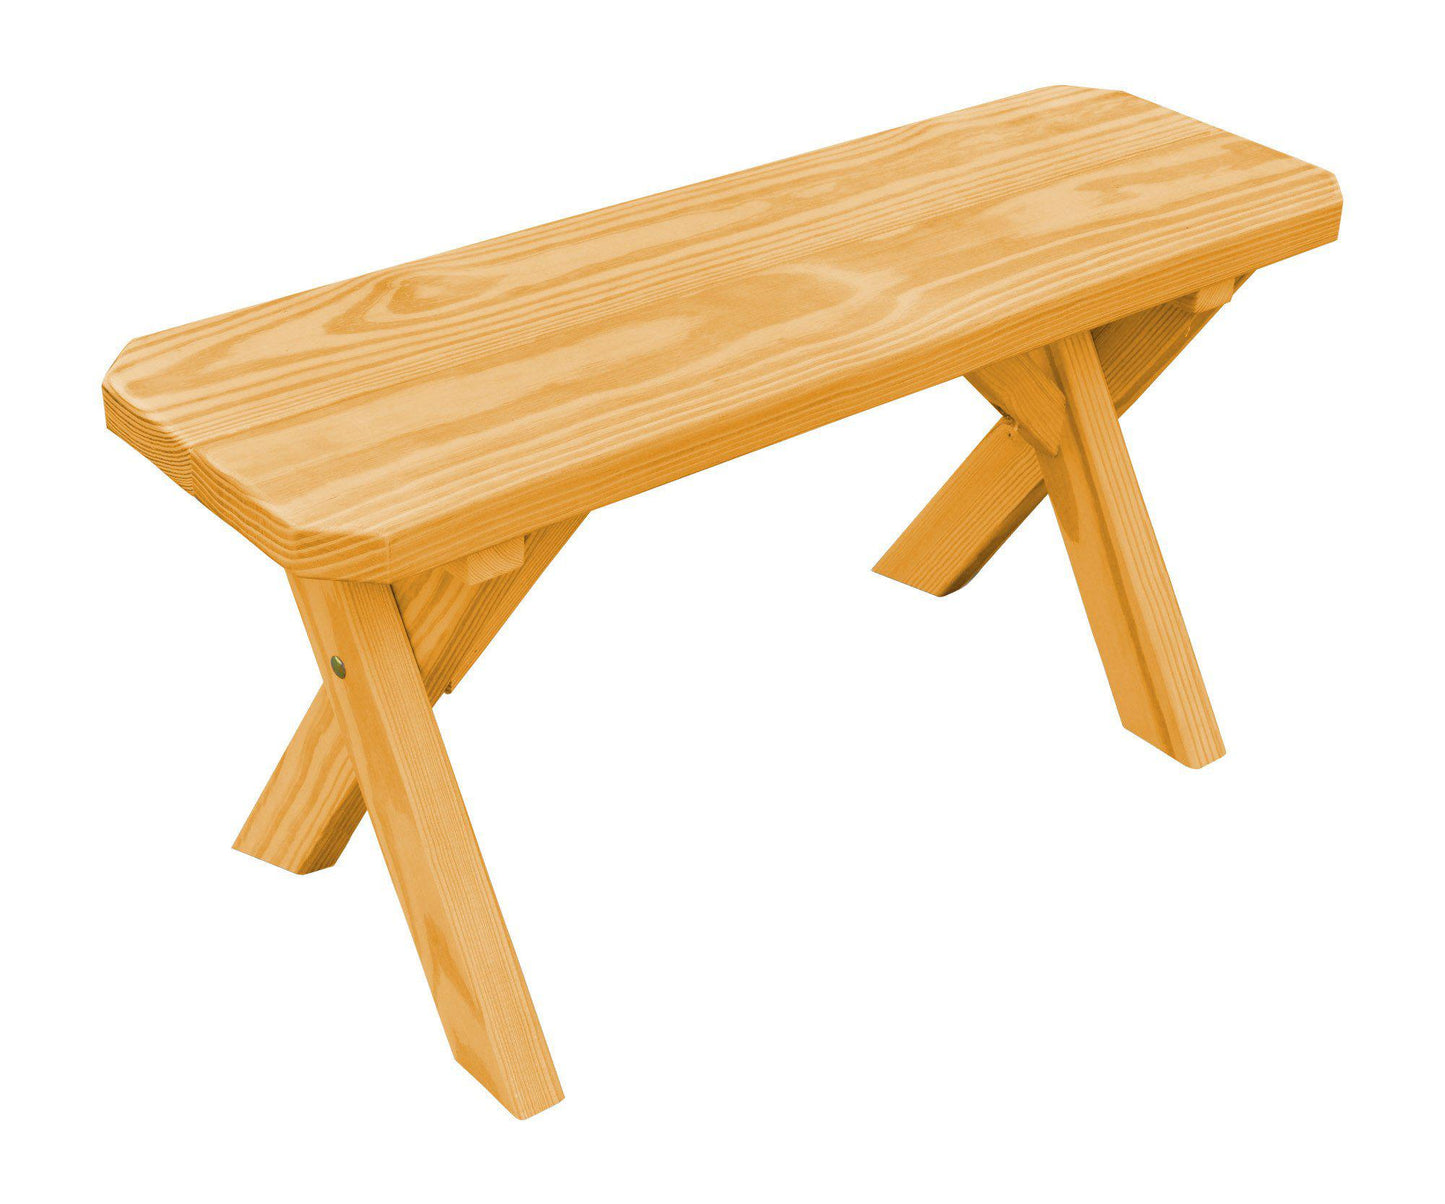 A&L Furniture Co. Pressure Treated Pine 33" Crossleg Bench Only - LEAD TIME TO SHIP 10 BUSINESS DAYS